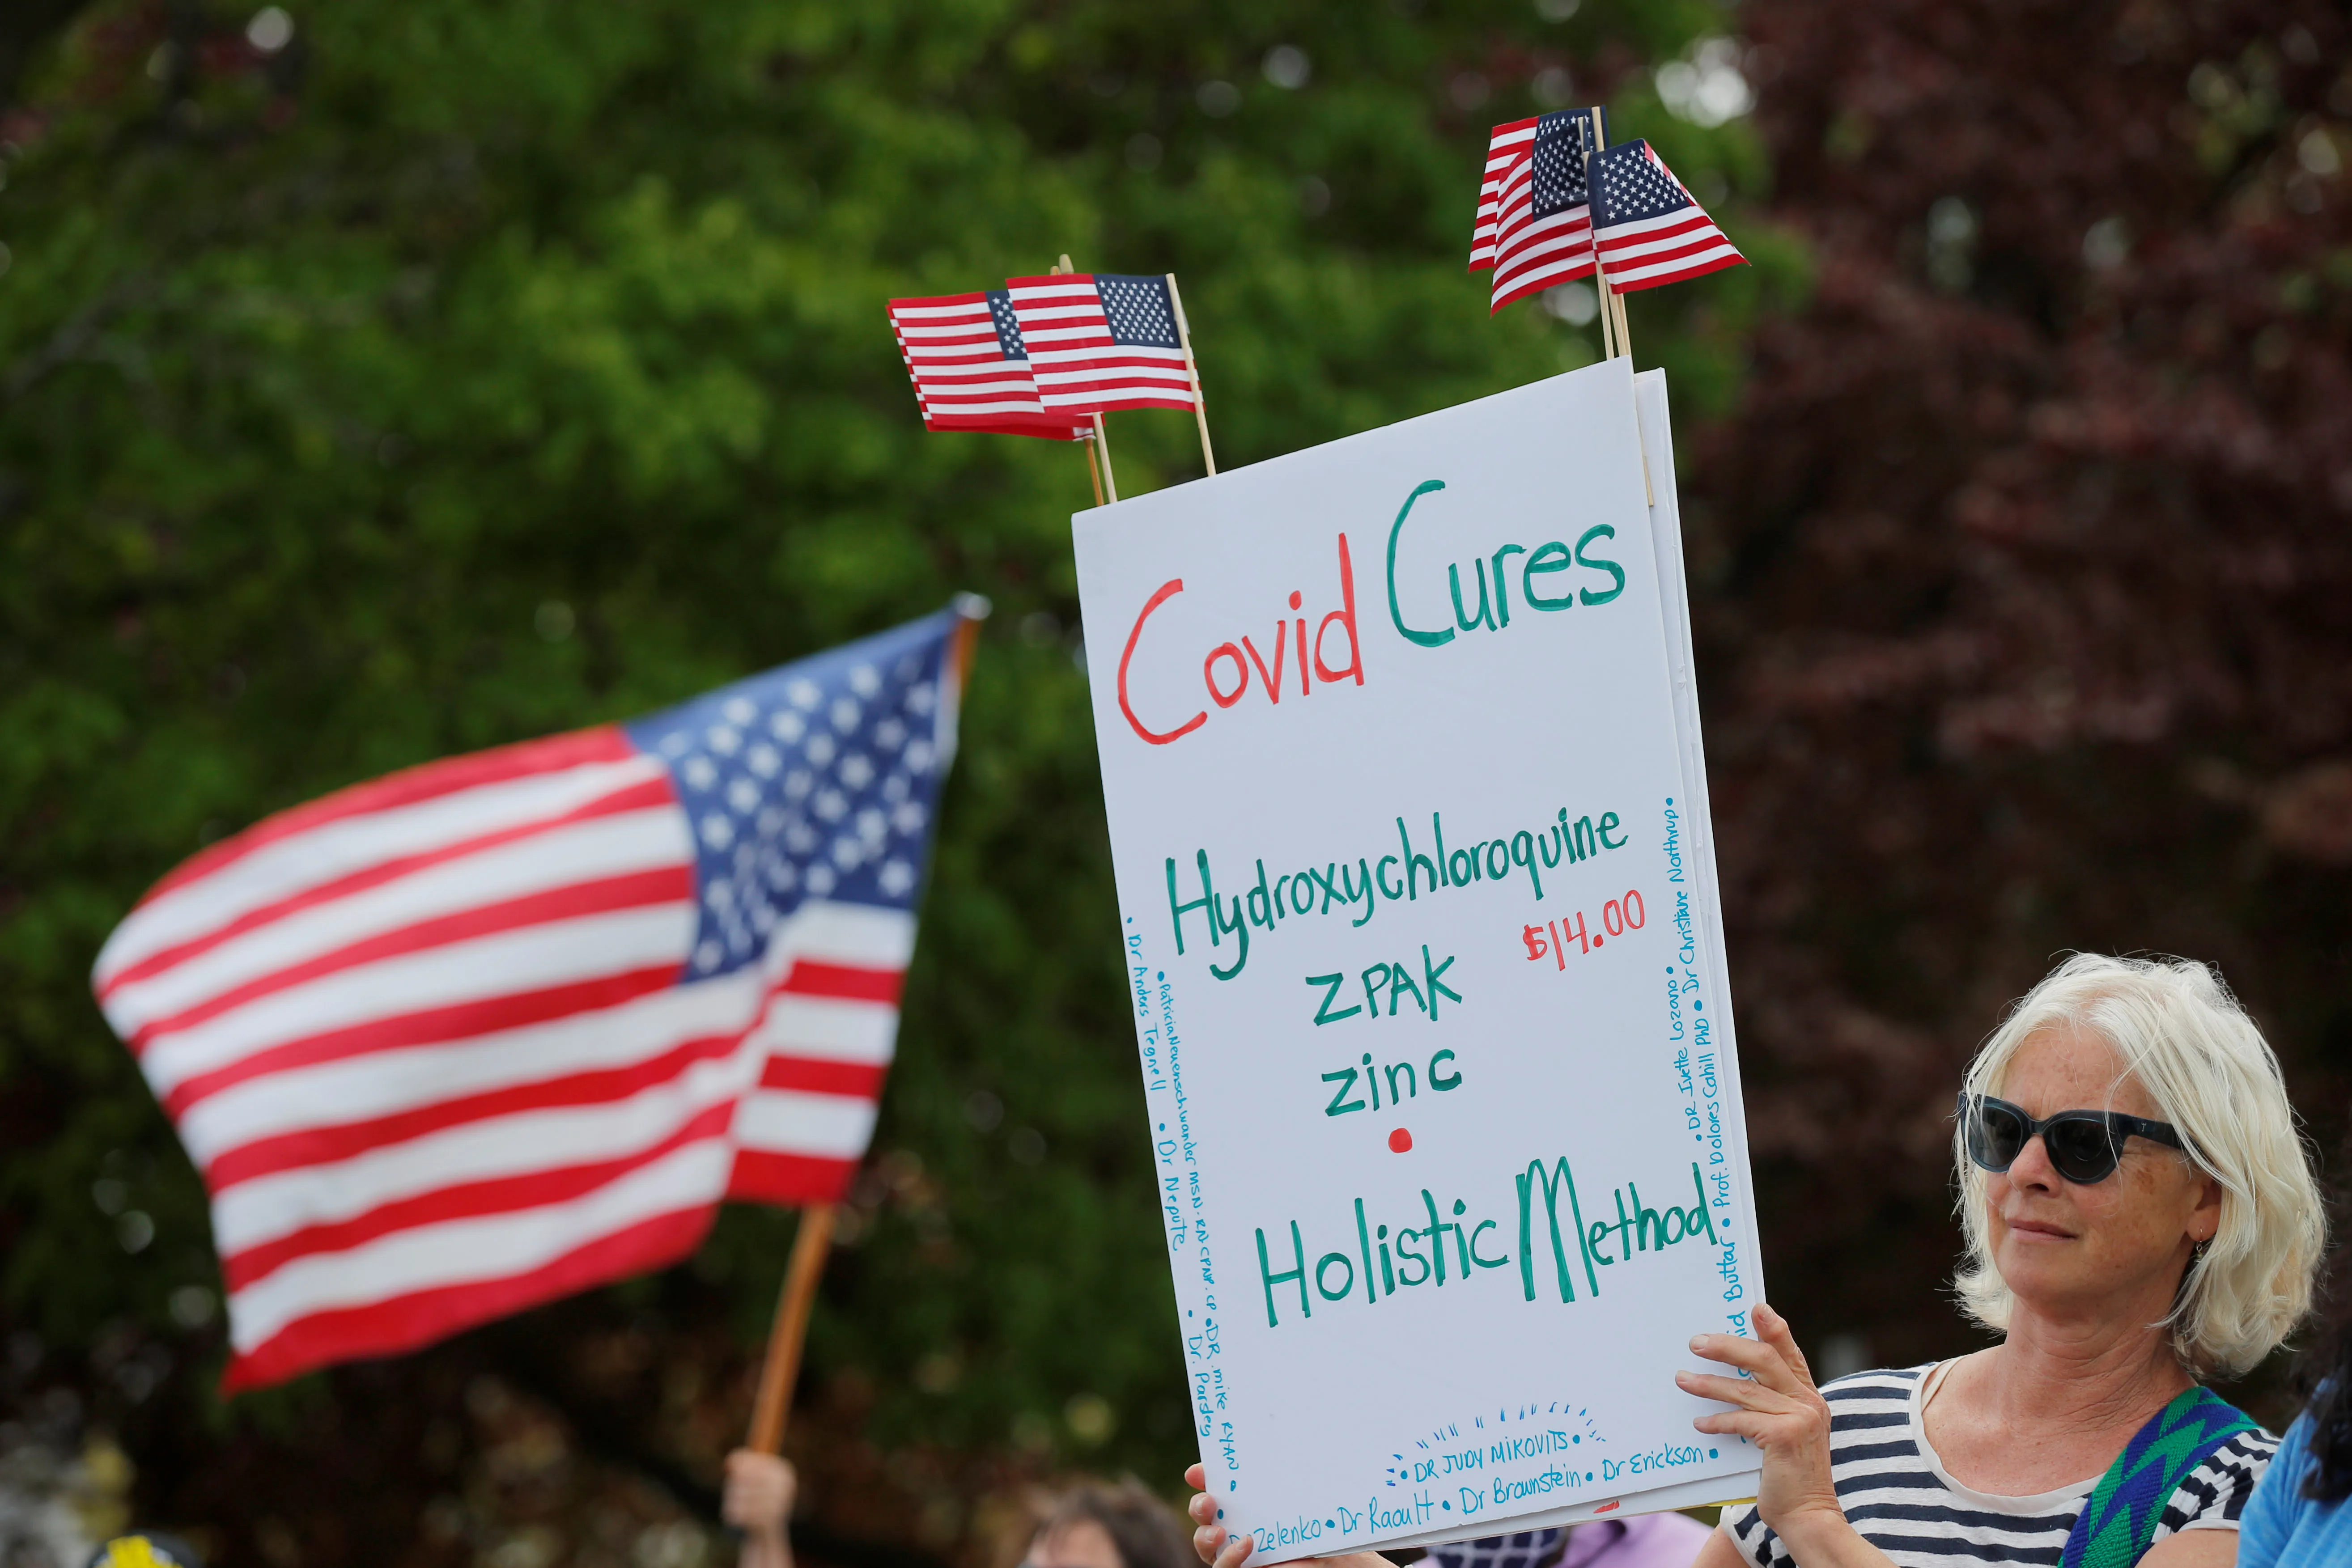 A woman holds a sign listing "Covid Cures," including hydroxychloroquine, at a protest against restrictions implemented in response to the coronavirus disease (COVID-19) outbreak near Massachusetts Governor Charlie Baker’s house in Swampscott, Massachusetts, U.S., May 16, 2020.   REUTERS/Brian Snyder